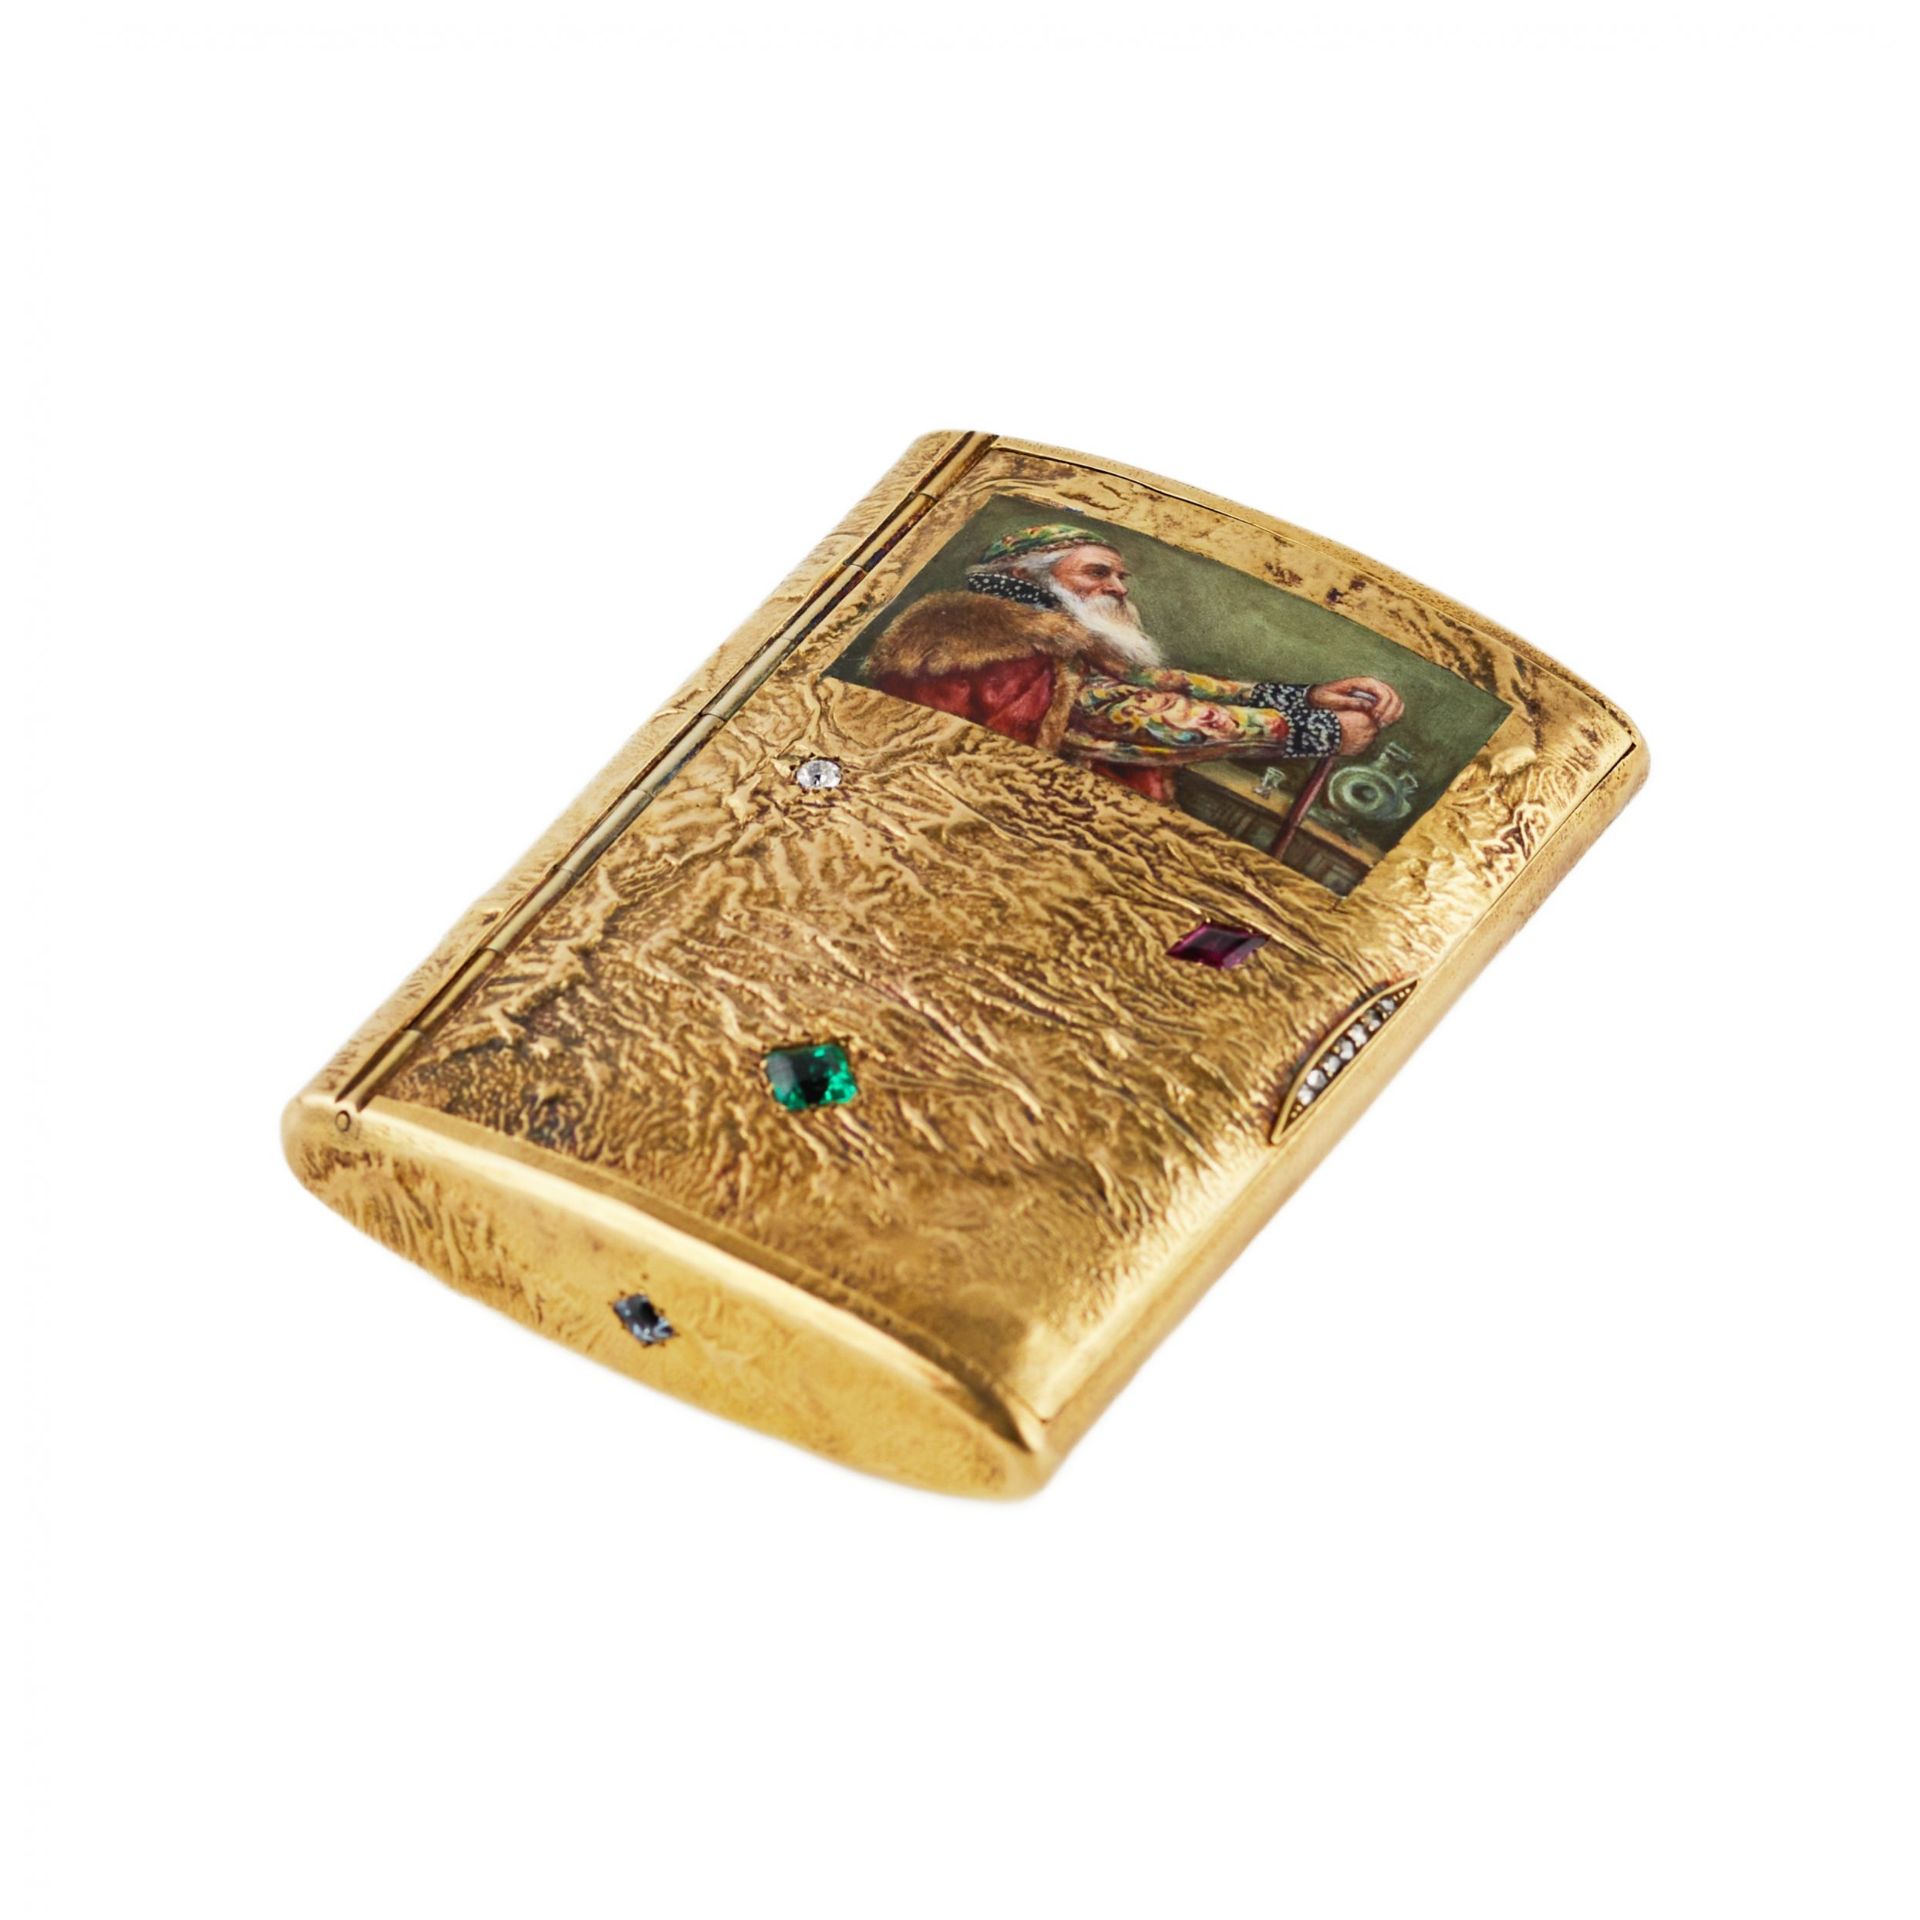 V.A. Kubarev. Gilded silver cigarette case with enamel painting. Moscow. 1908-1917. - Image 2 of 9